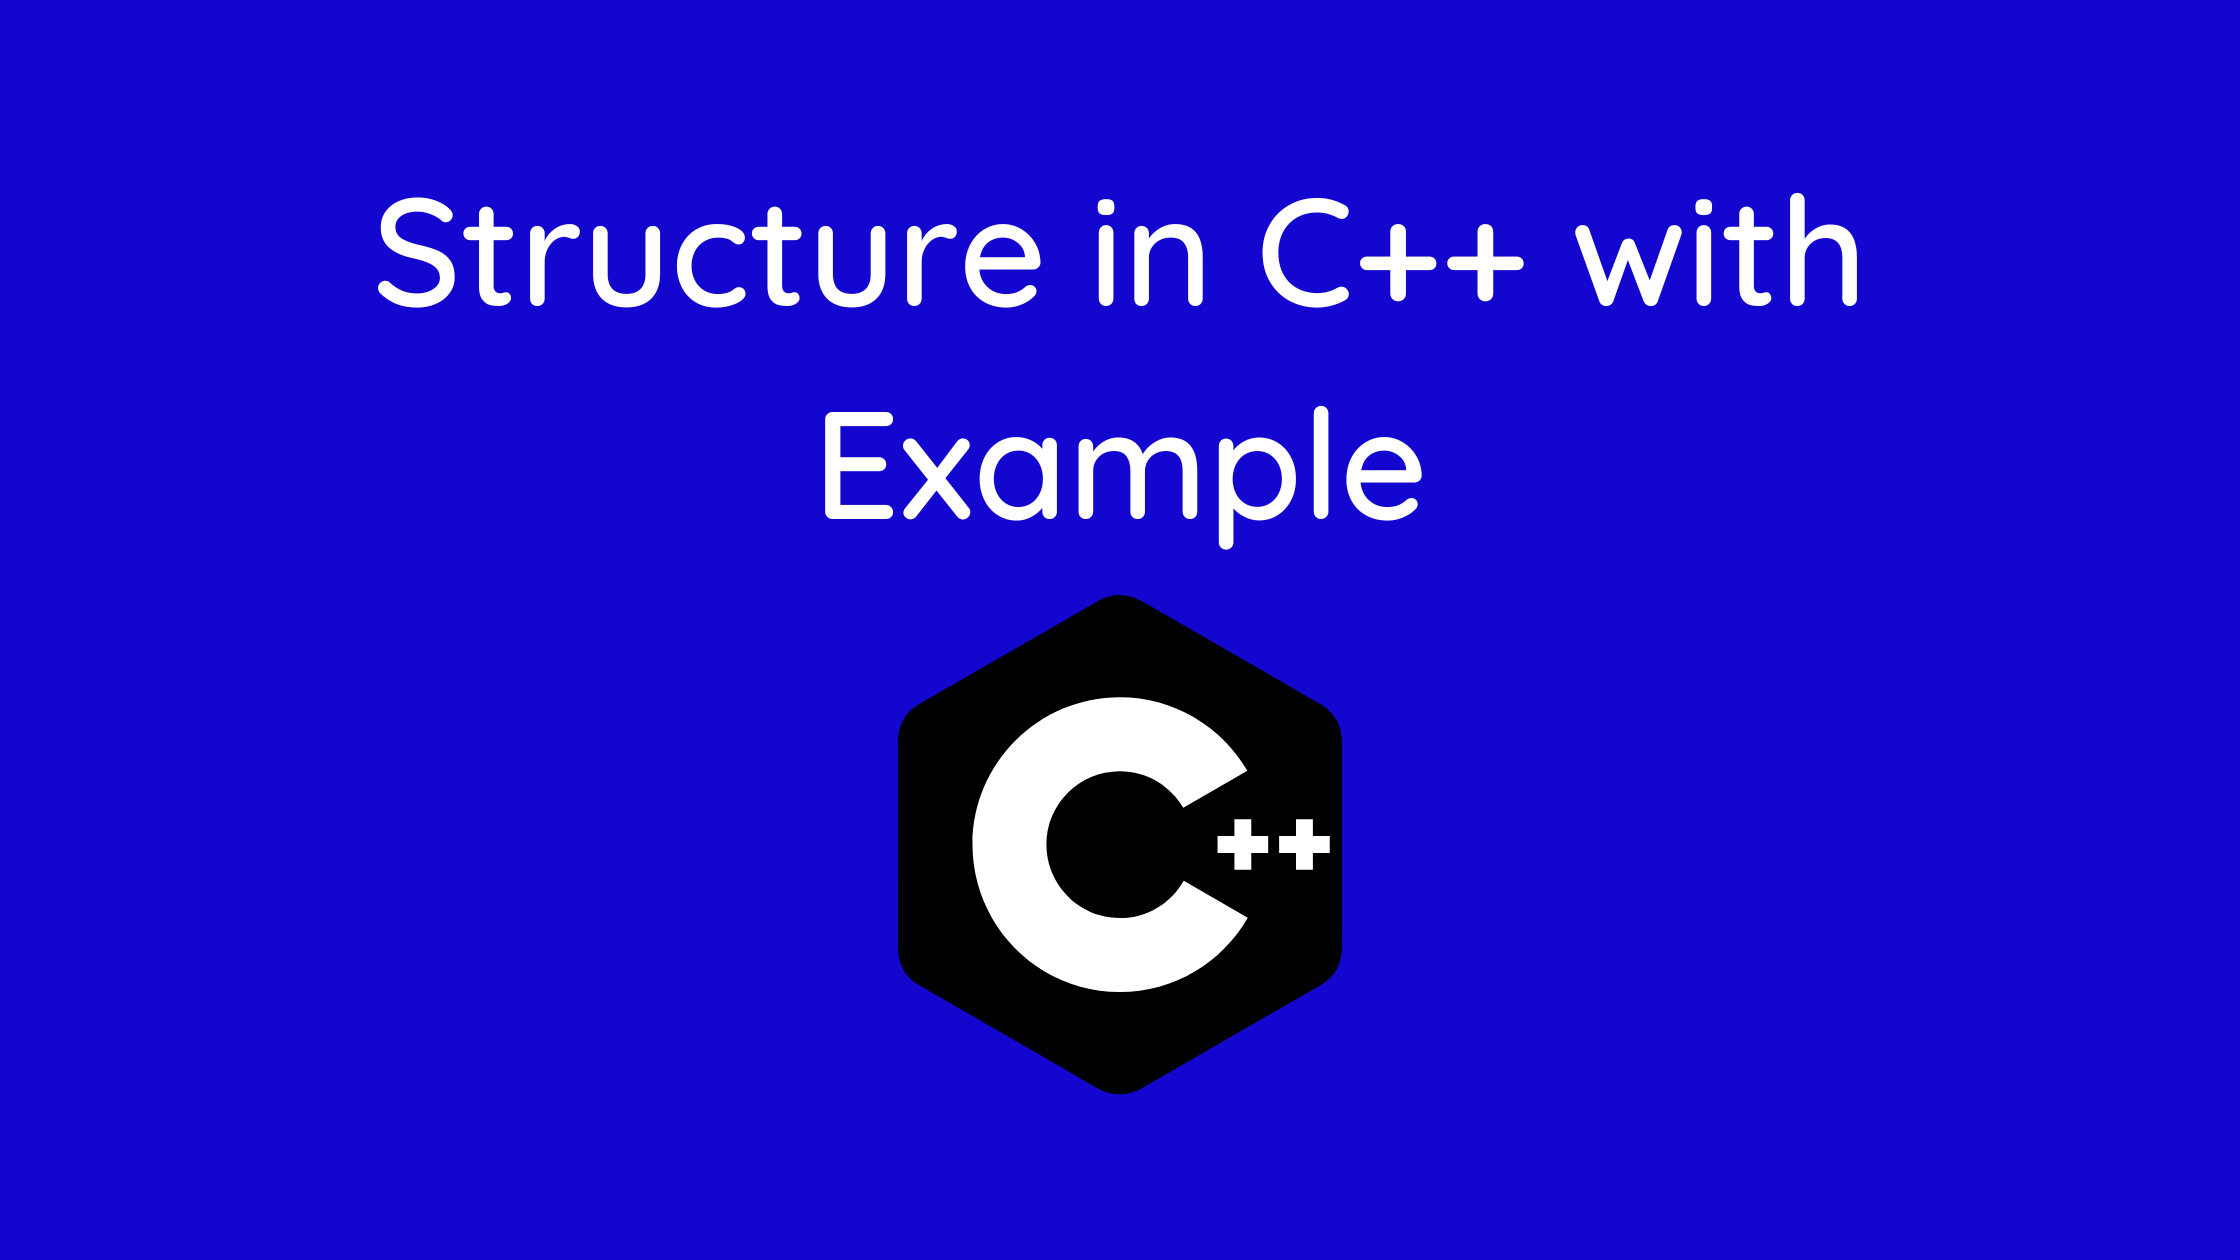 Structure in C++